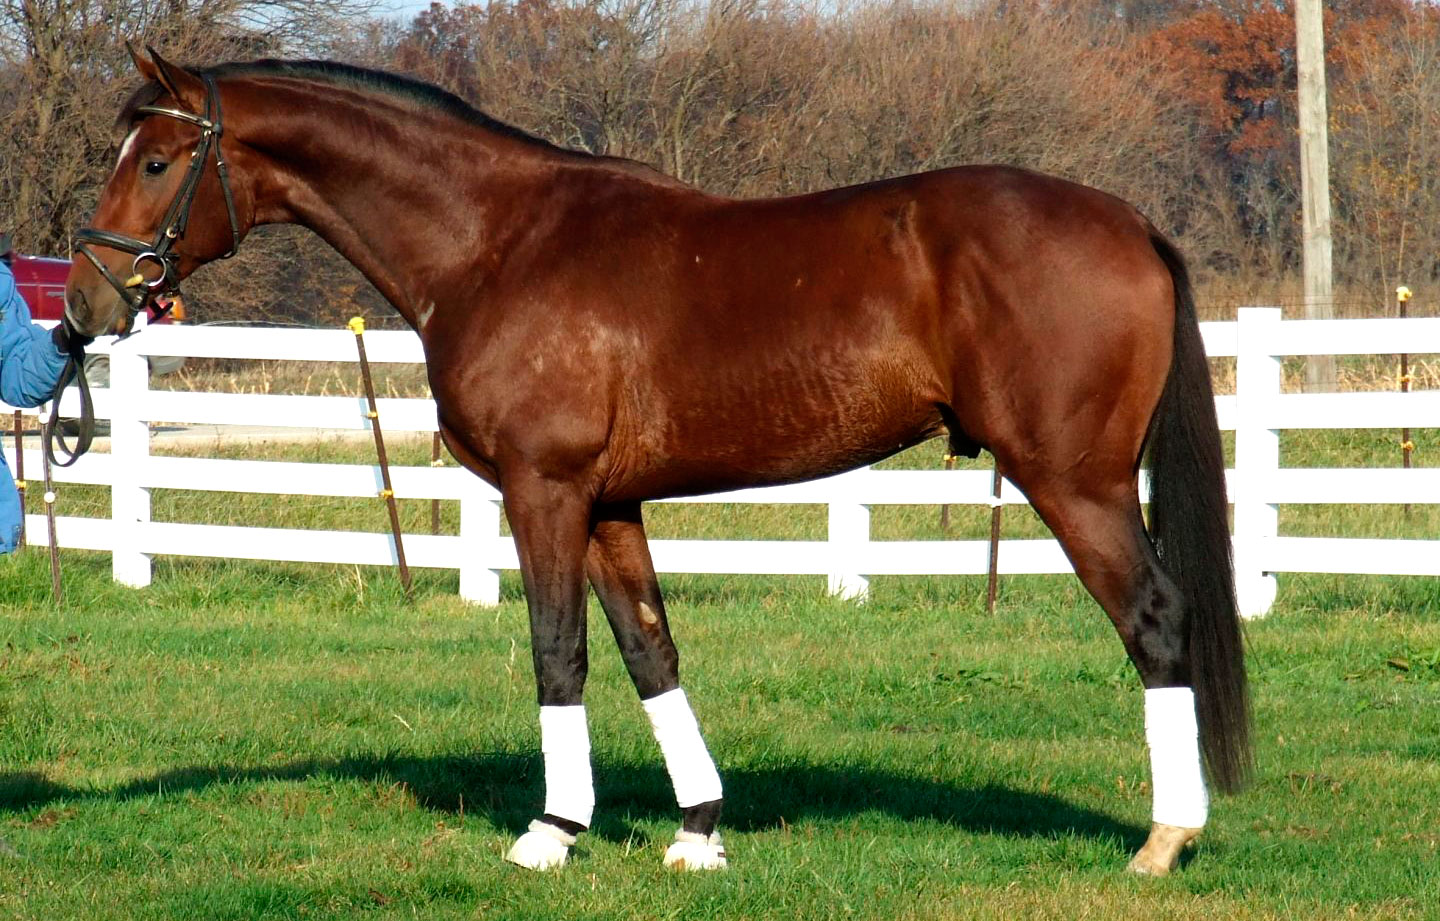 Characteristics of the Holsteiner Horse